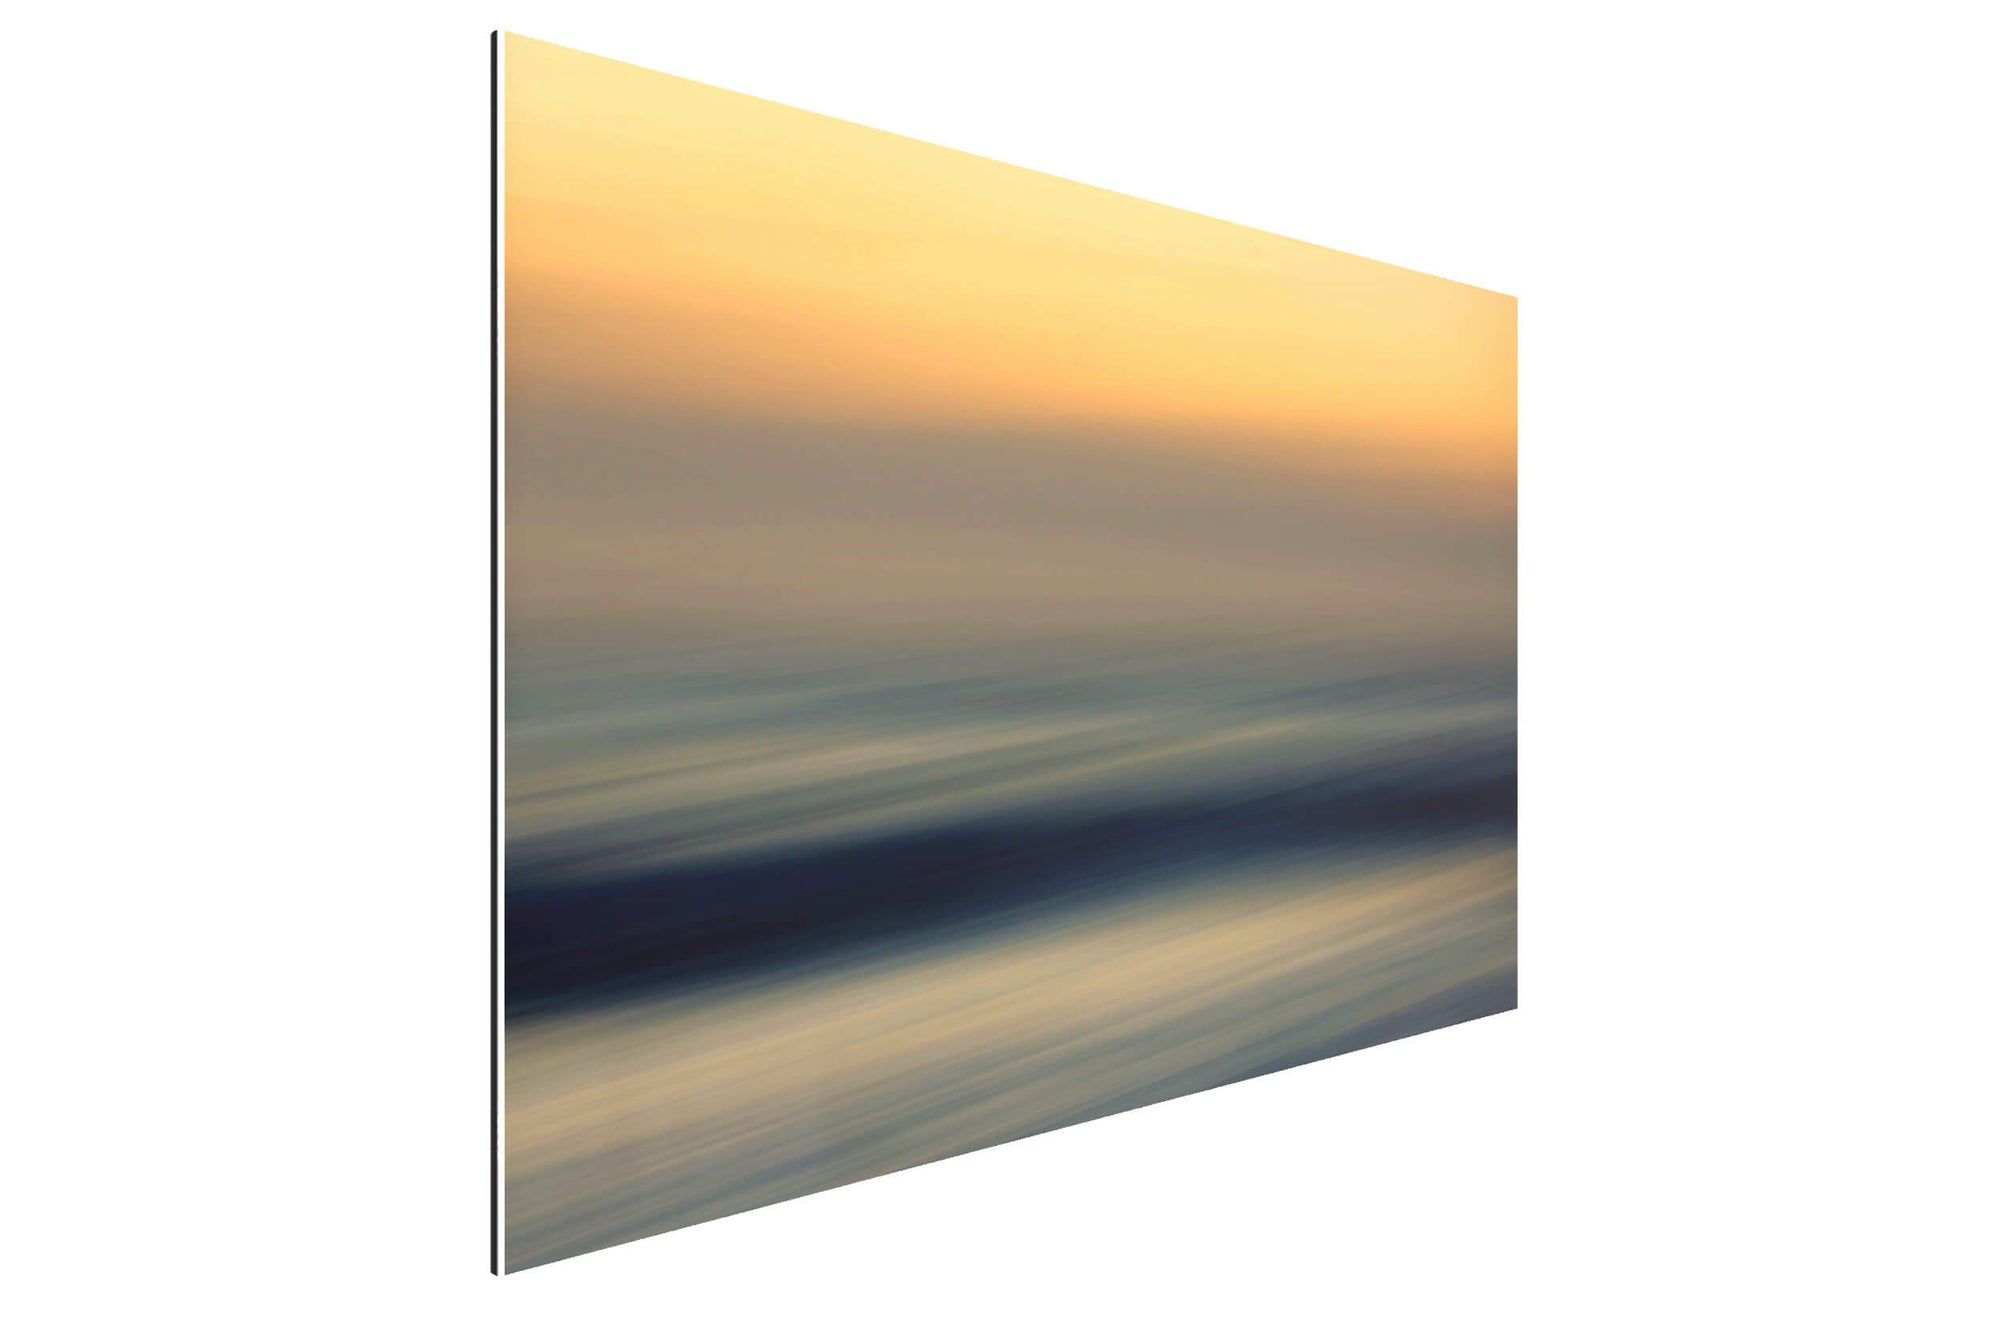 A TruLife acrylic abstract sunset picture photographed in Big Sur, California.